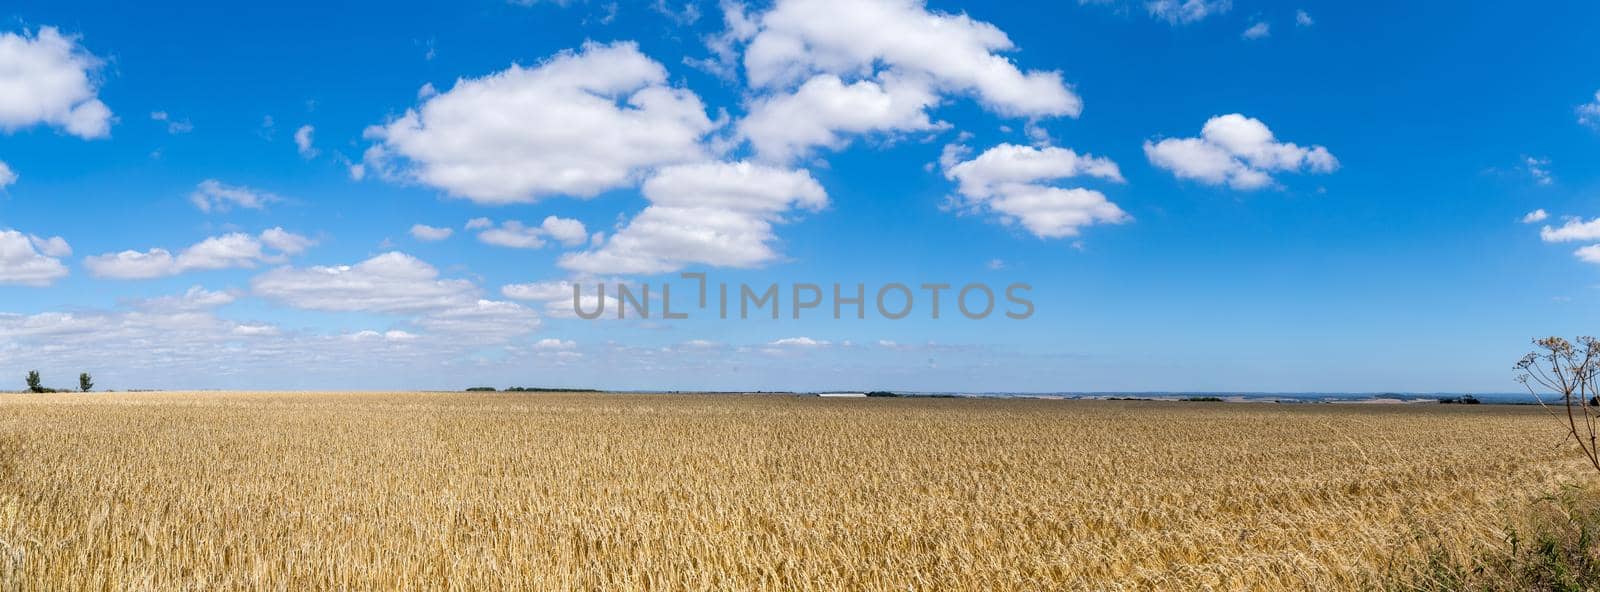 a Field of barley in a summer day. during harvesting period, a panoramic view of the crops with a ray of sunshine